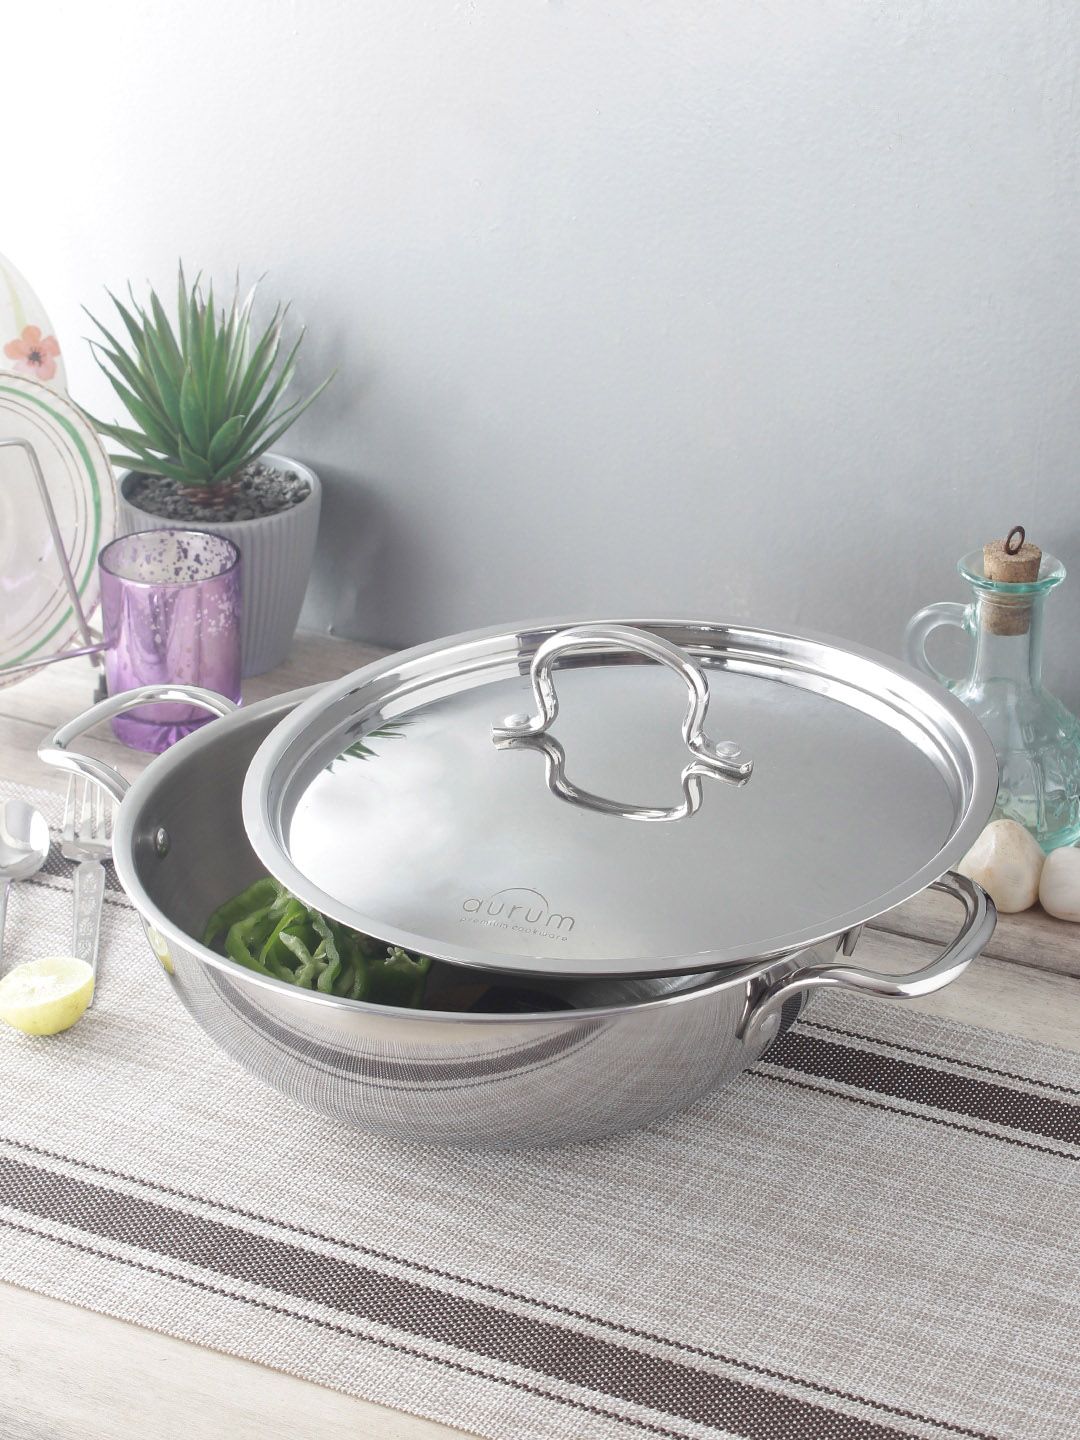 AURUM Silver-Toned Triply Stainless Steel Kadai with Stainless Steel Lid 6.0 L Price in India